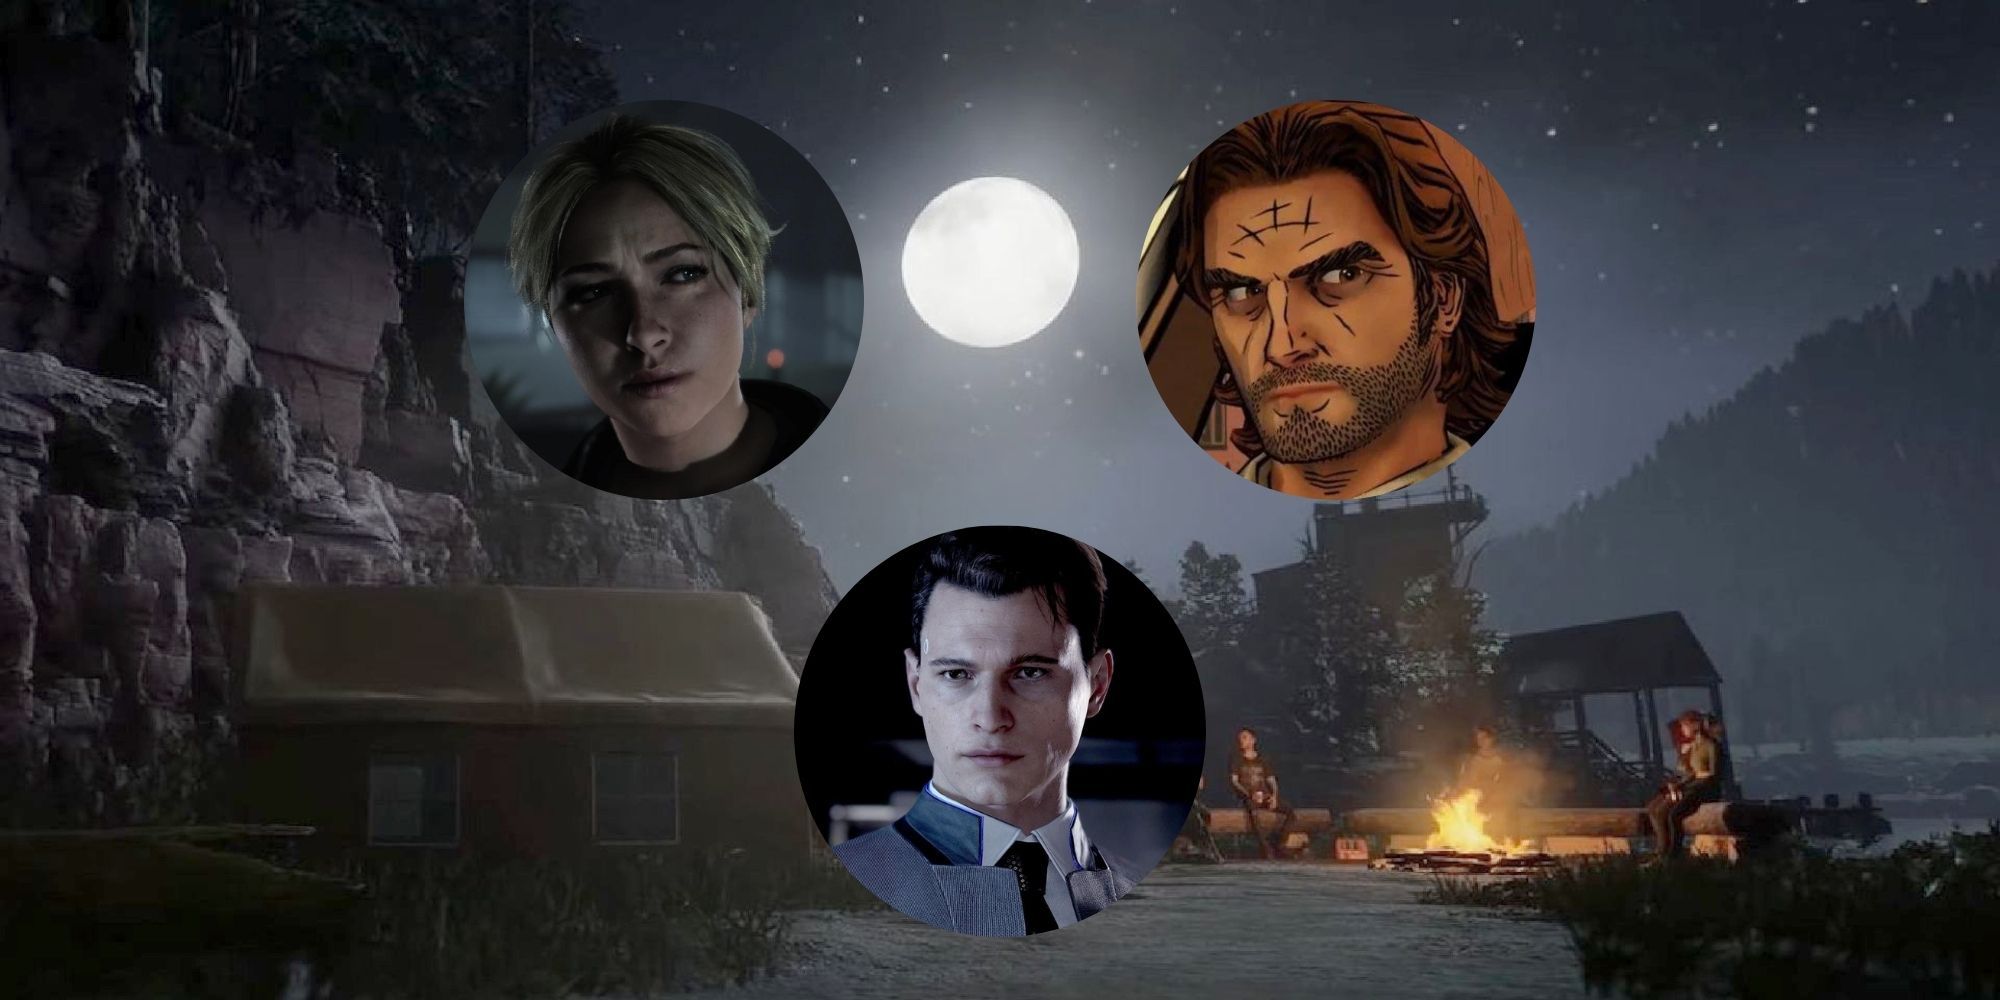 Games Like The Quarry Featured Image Image Including Sam from Until Dawn, Conner from Detroit Become Human, and Bigby from The Wolf Among Us With Hackett's Quarry In Background